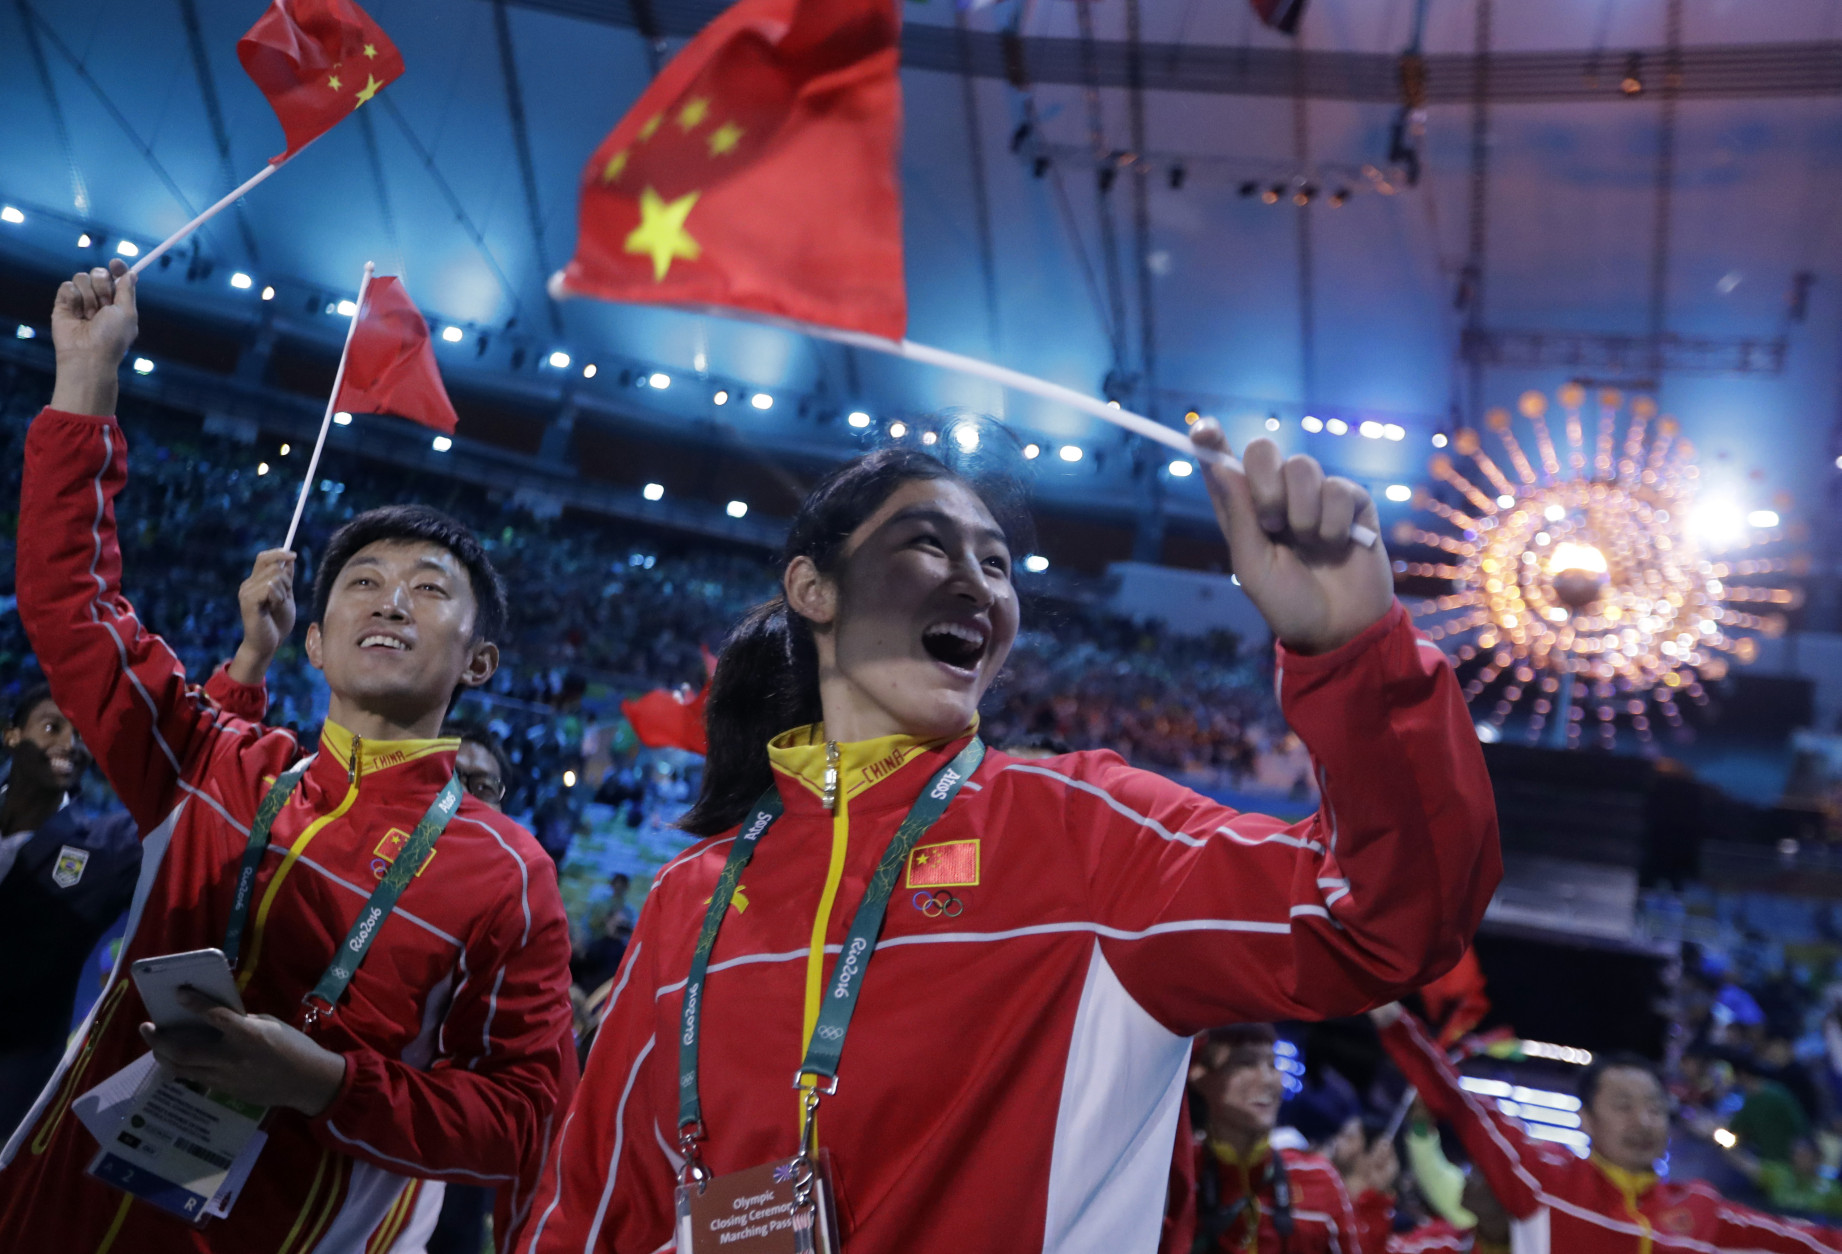 Athletes from China march in during the closing ceremony in the Maracana stadium at the 2016 Summer Olympics in Rio de Janeiro, Brazil, Sunday, Aug. 21, 2016. (AP Photo/David Goldman)